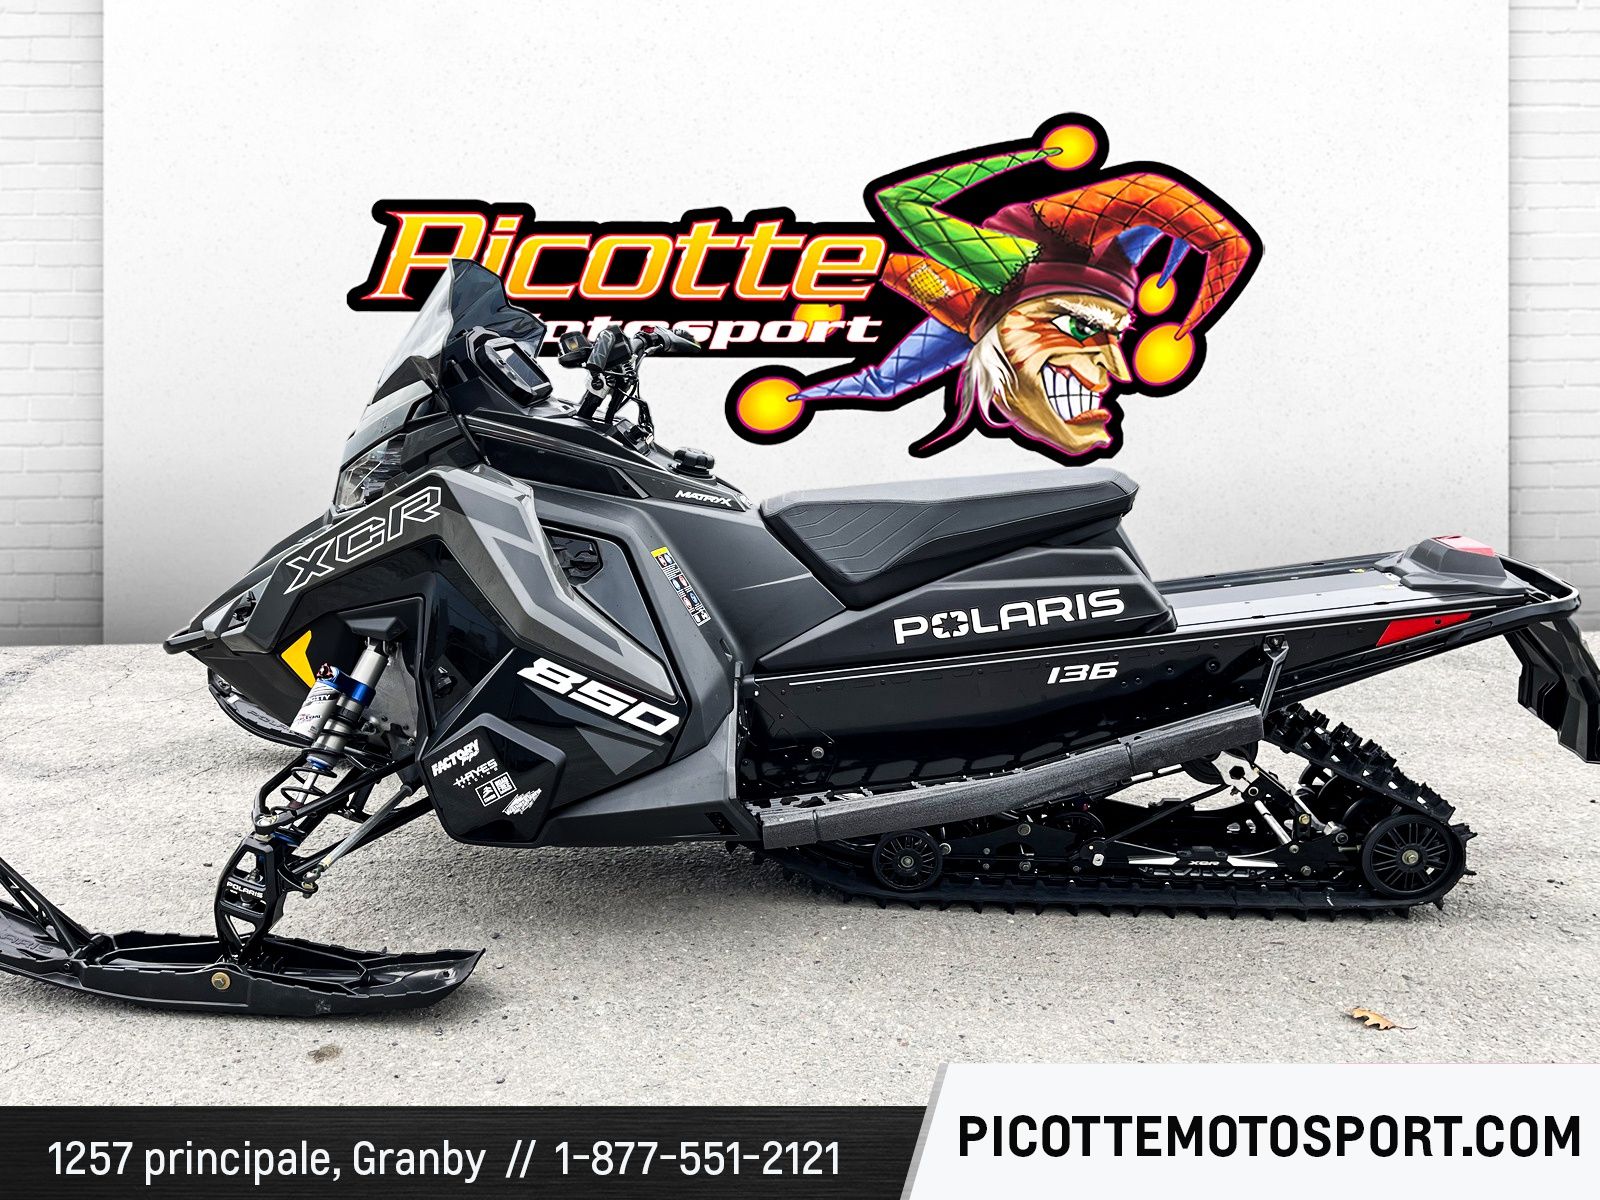 Picotte Motosport | Our Snowmobile in New inventory in Granby